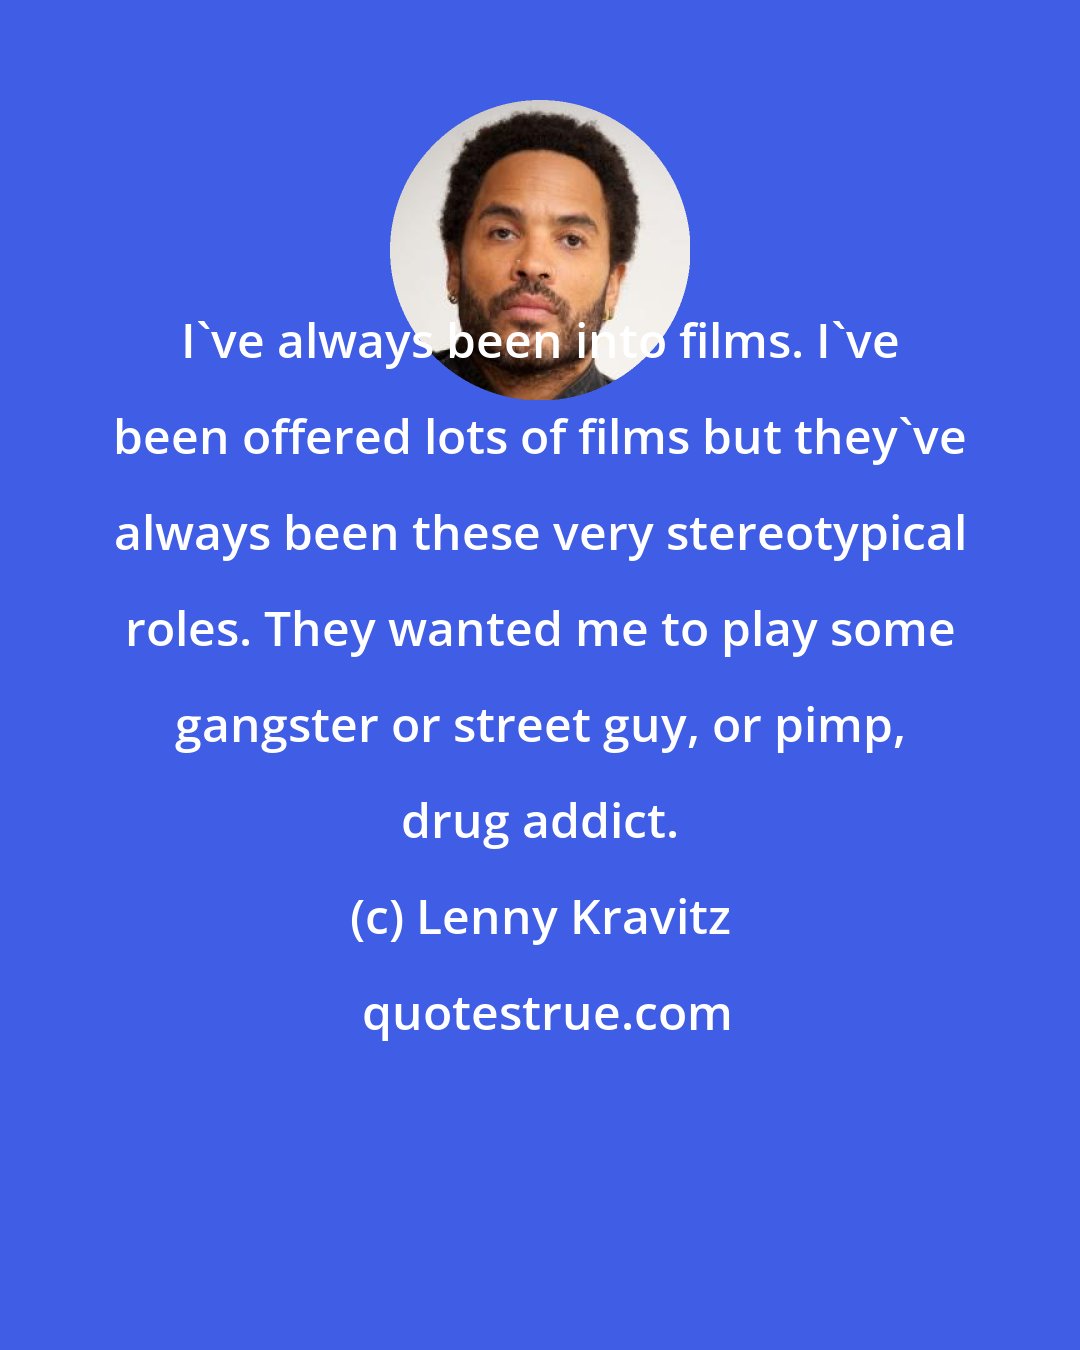 Lenny Kravitz: I've always been into films. I've been offered lots of films but they've always been these very stereotypical roles. They wanted me to play some gangster or street guy, or pimp, drug addict.